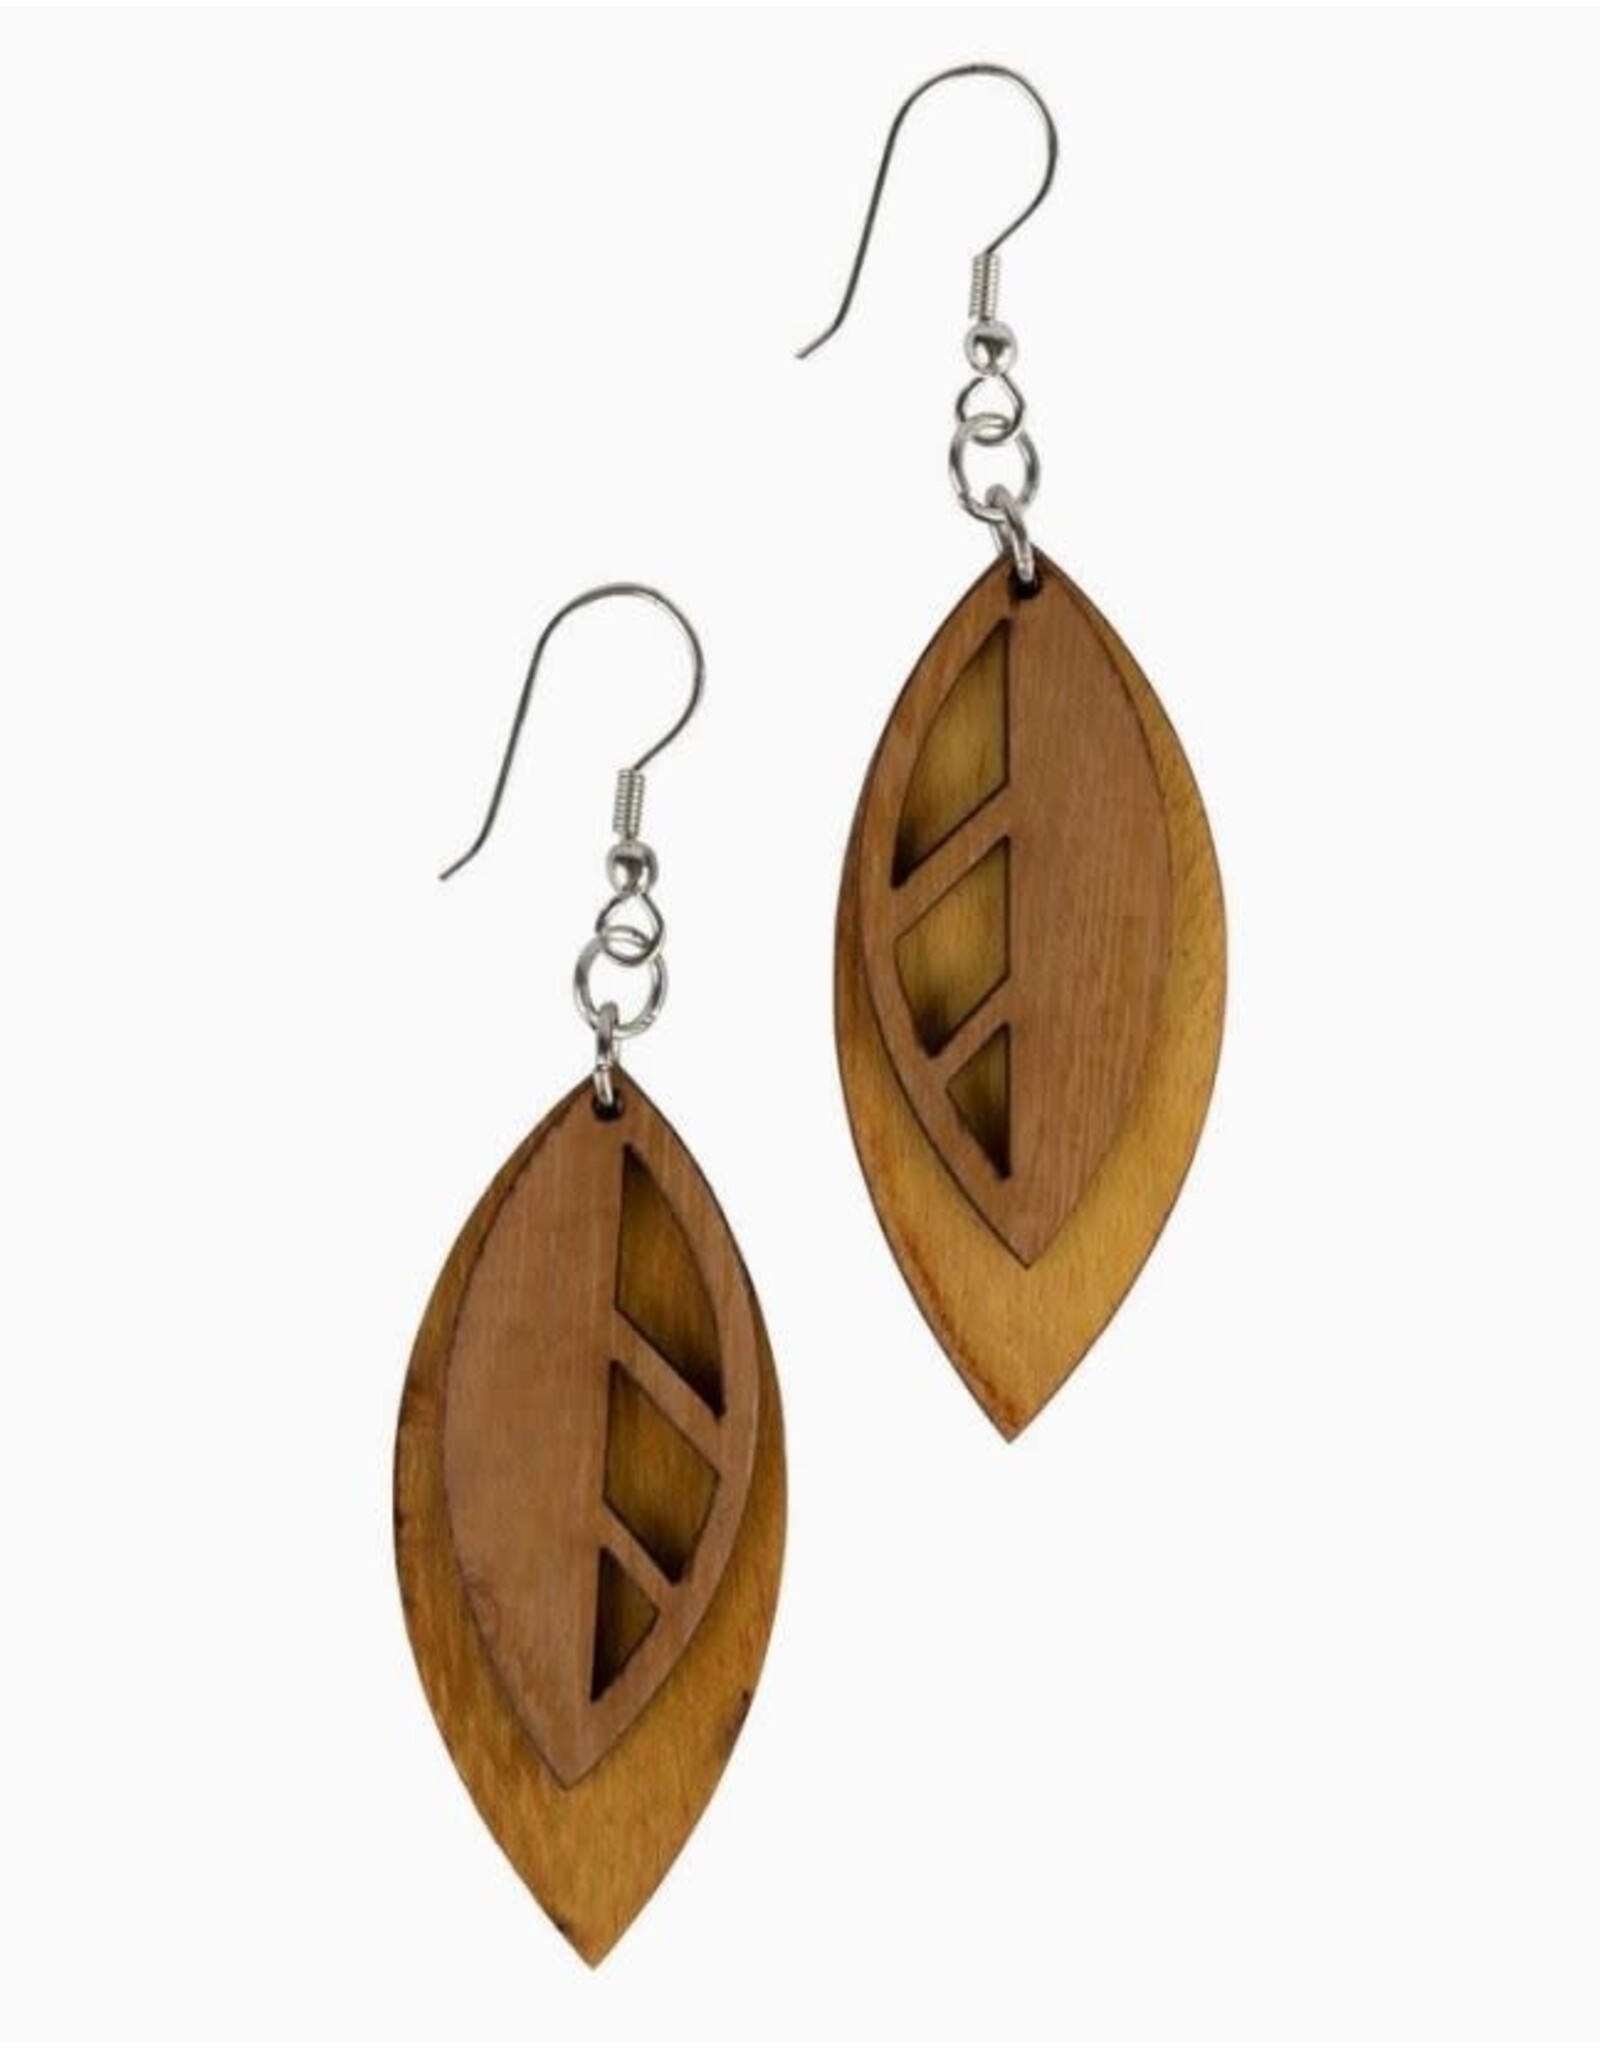 Philippines Falling Leaves Wood Earrings, Philippines